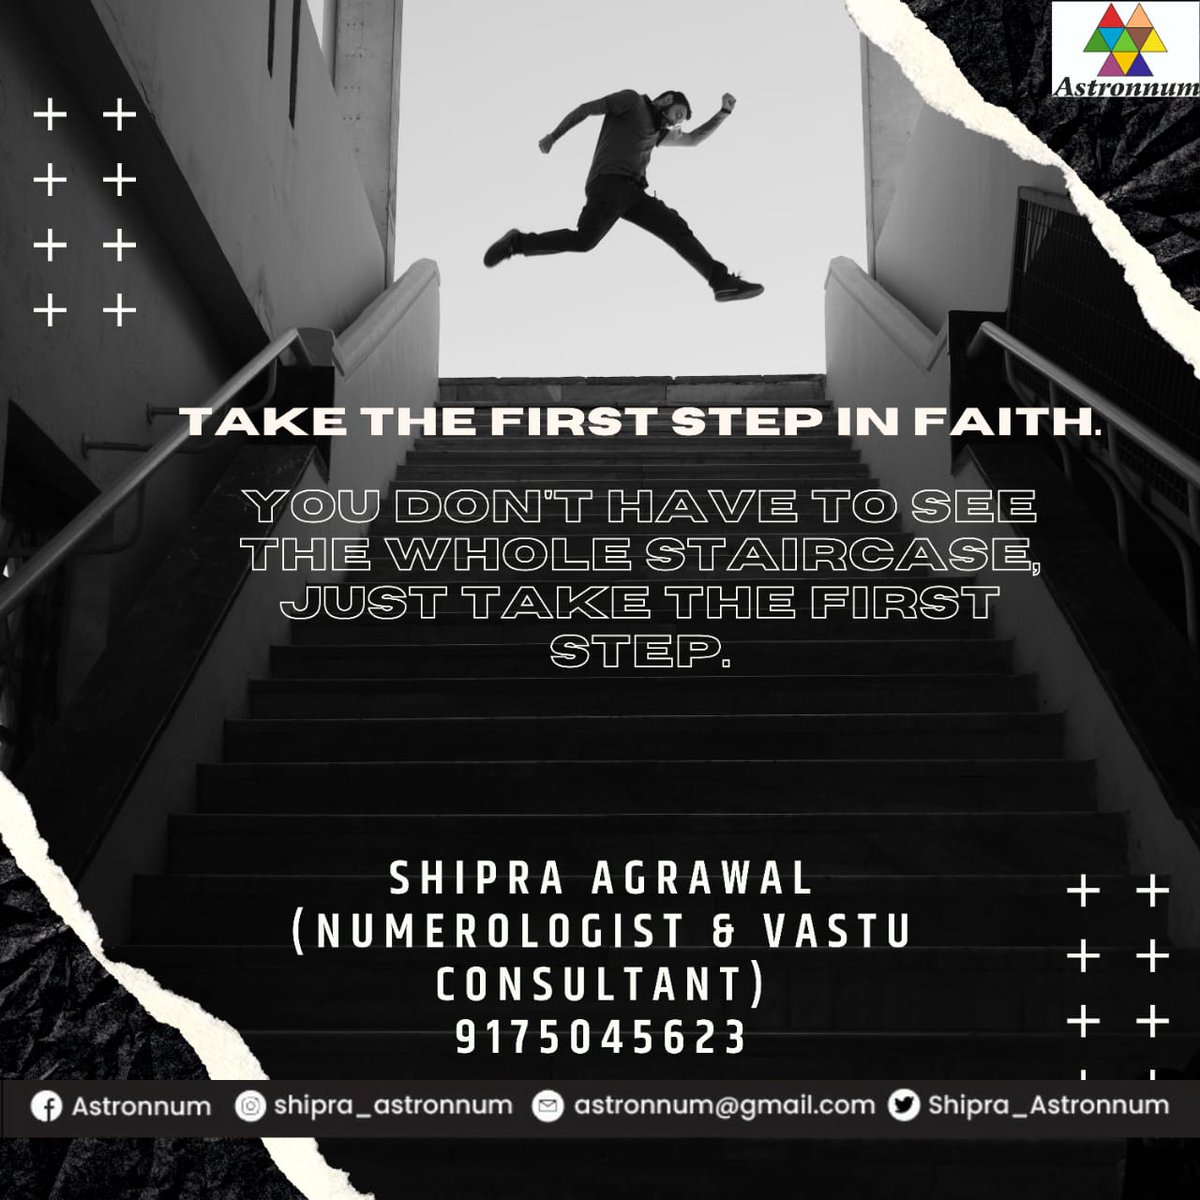 Trust in whatever we do builds the confidence to move ahead in life. Thus, have faith and make the right decisions. For any kind of Numerology Assistance or Vastu Consultancy, do connect with me... #astronnum #shipraagrawal #numerologist #vastuconsultant #numerology